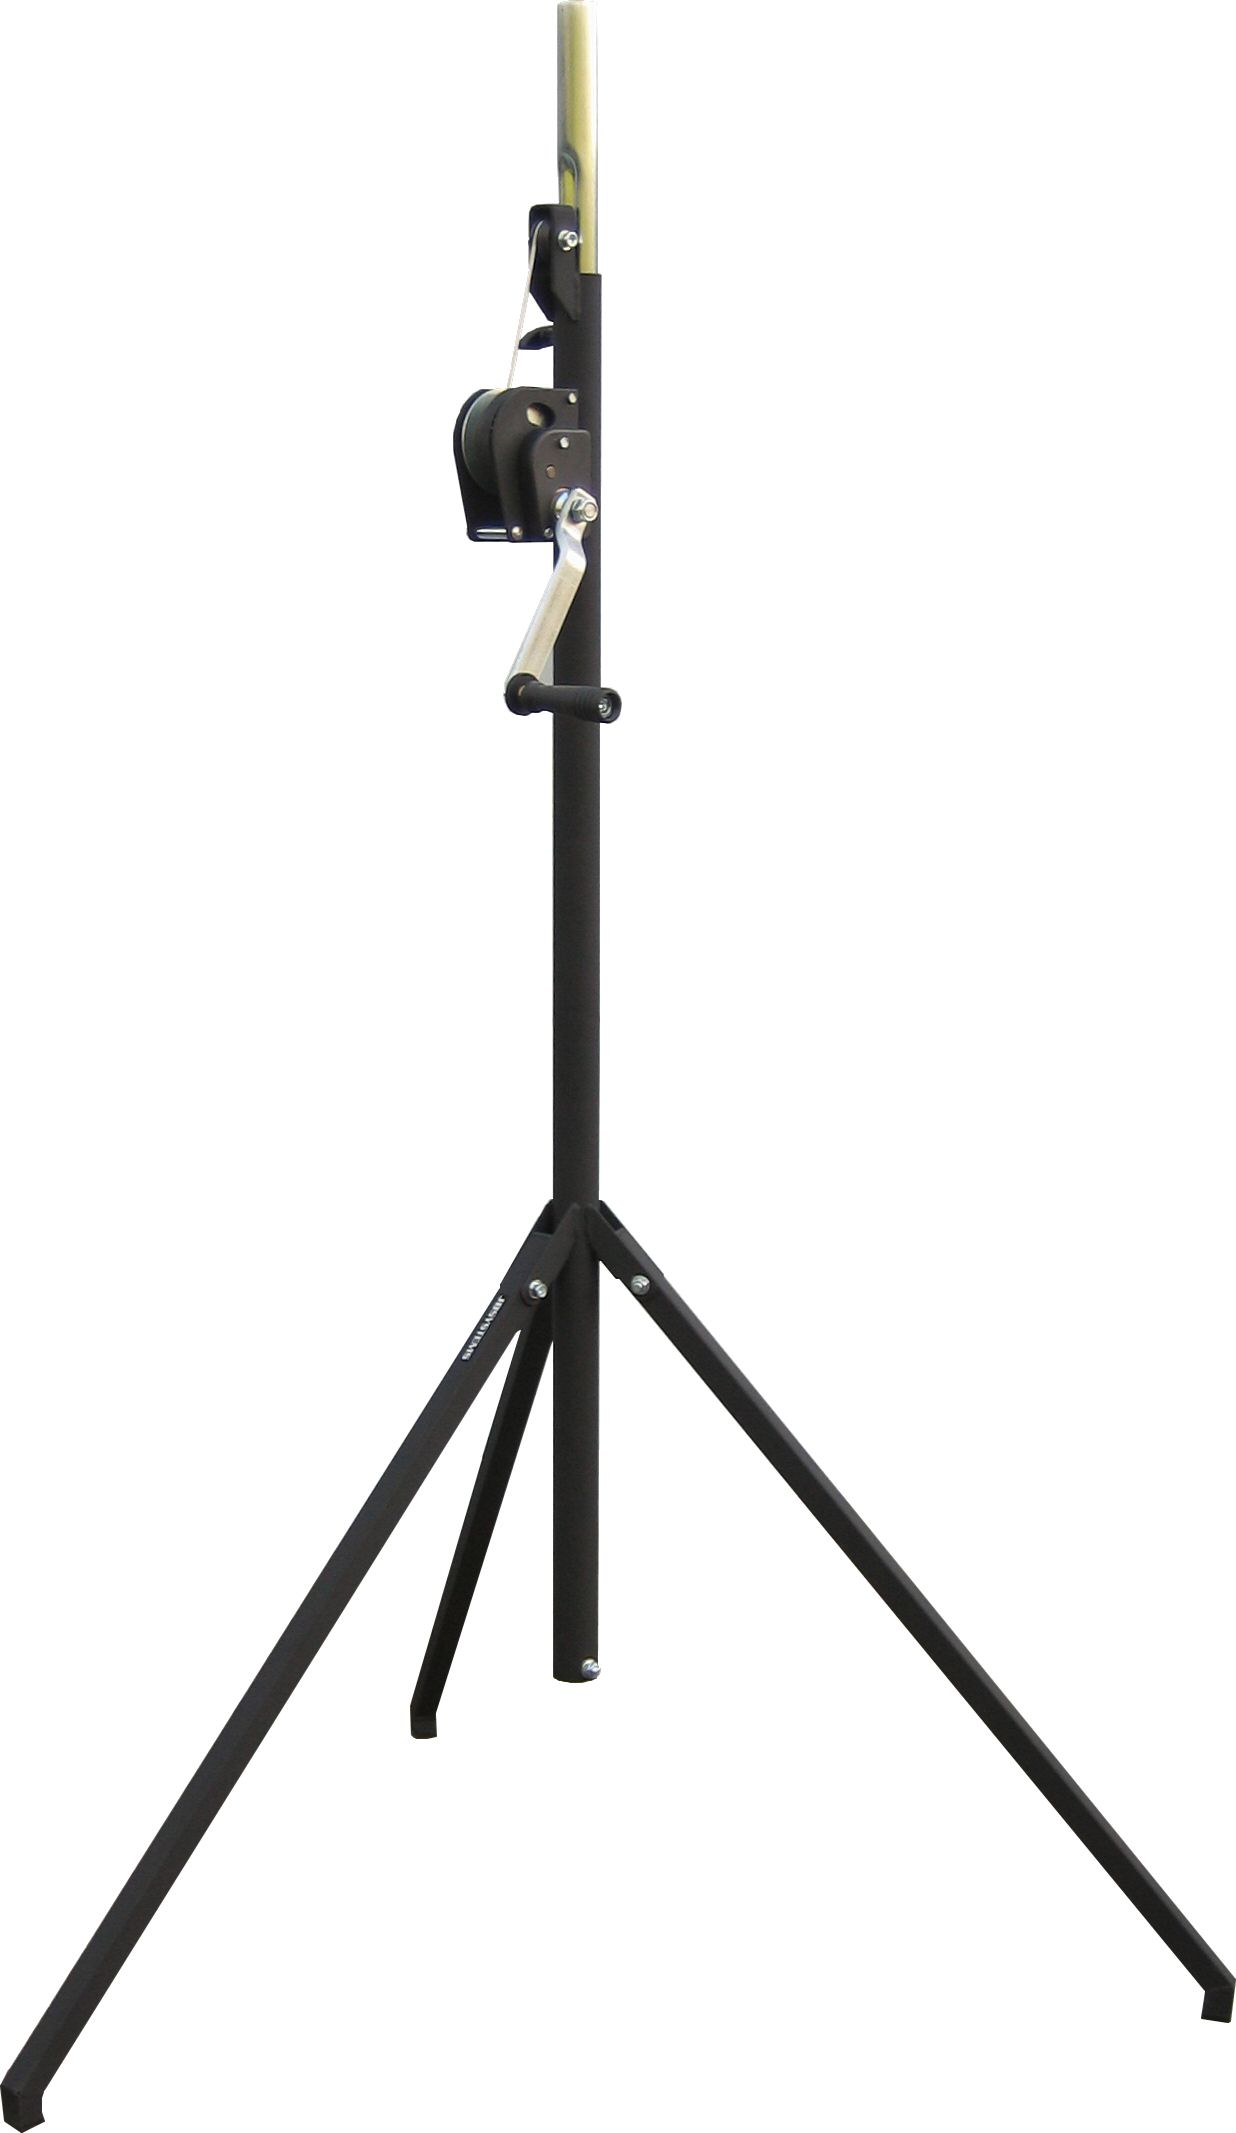 T+V/GS-approved windup light stand, min/max height: 1.67m/2.70m max load: 70kg